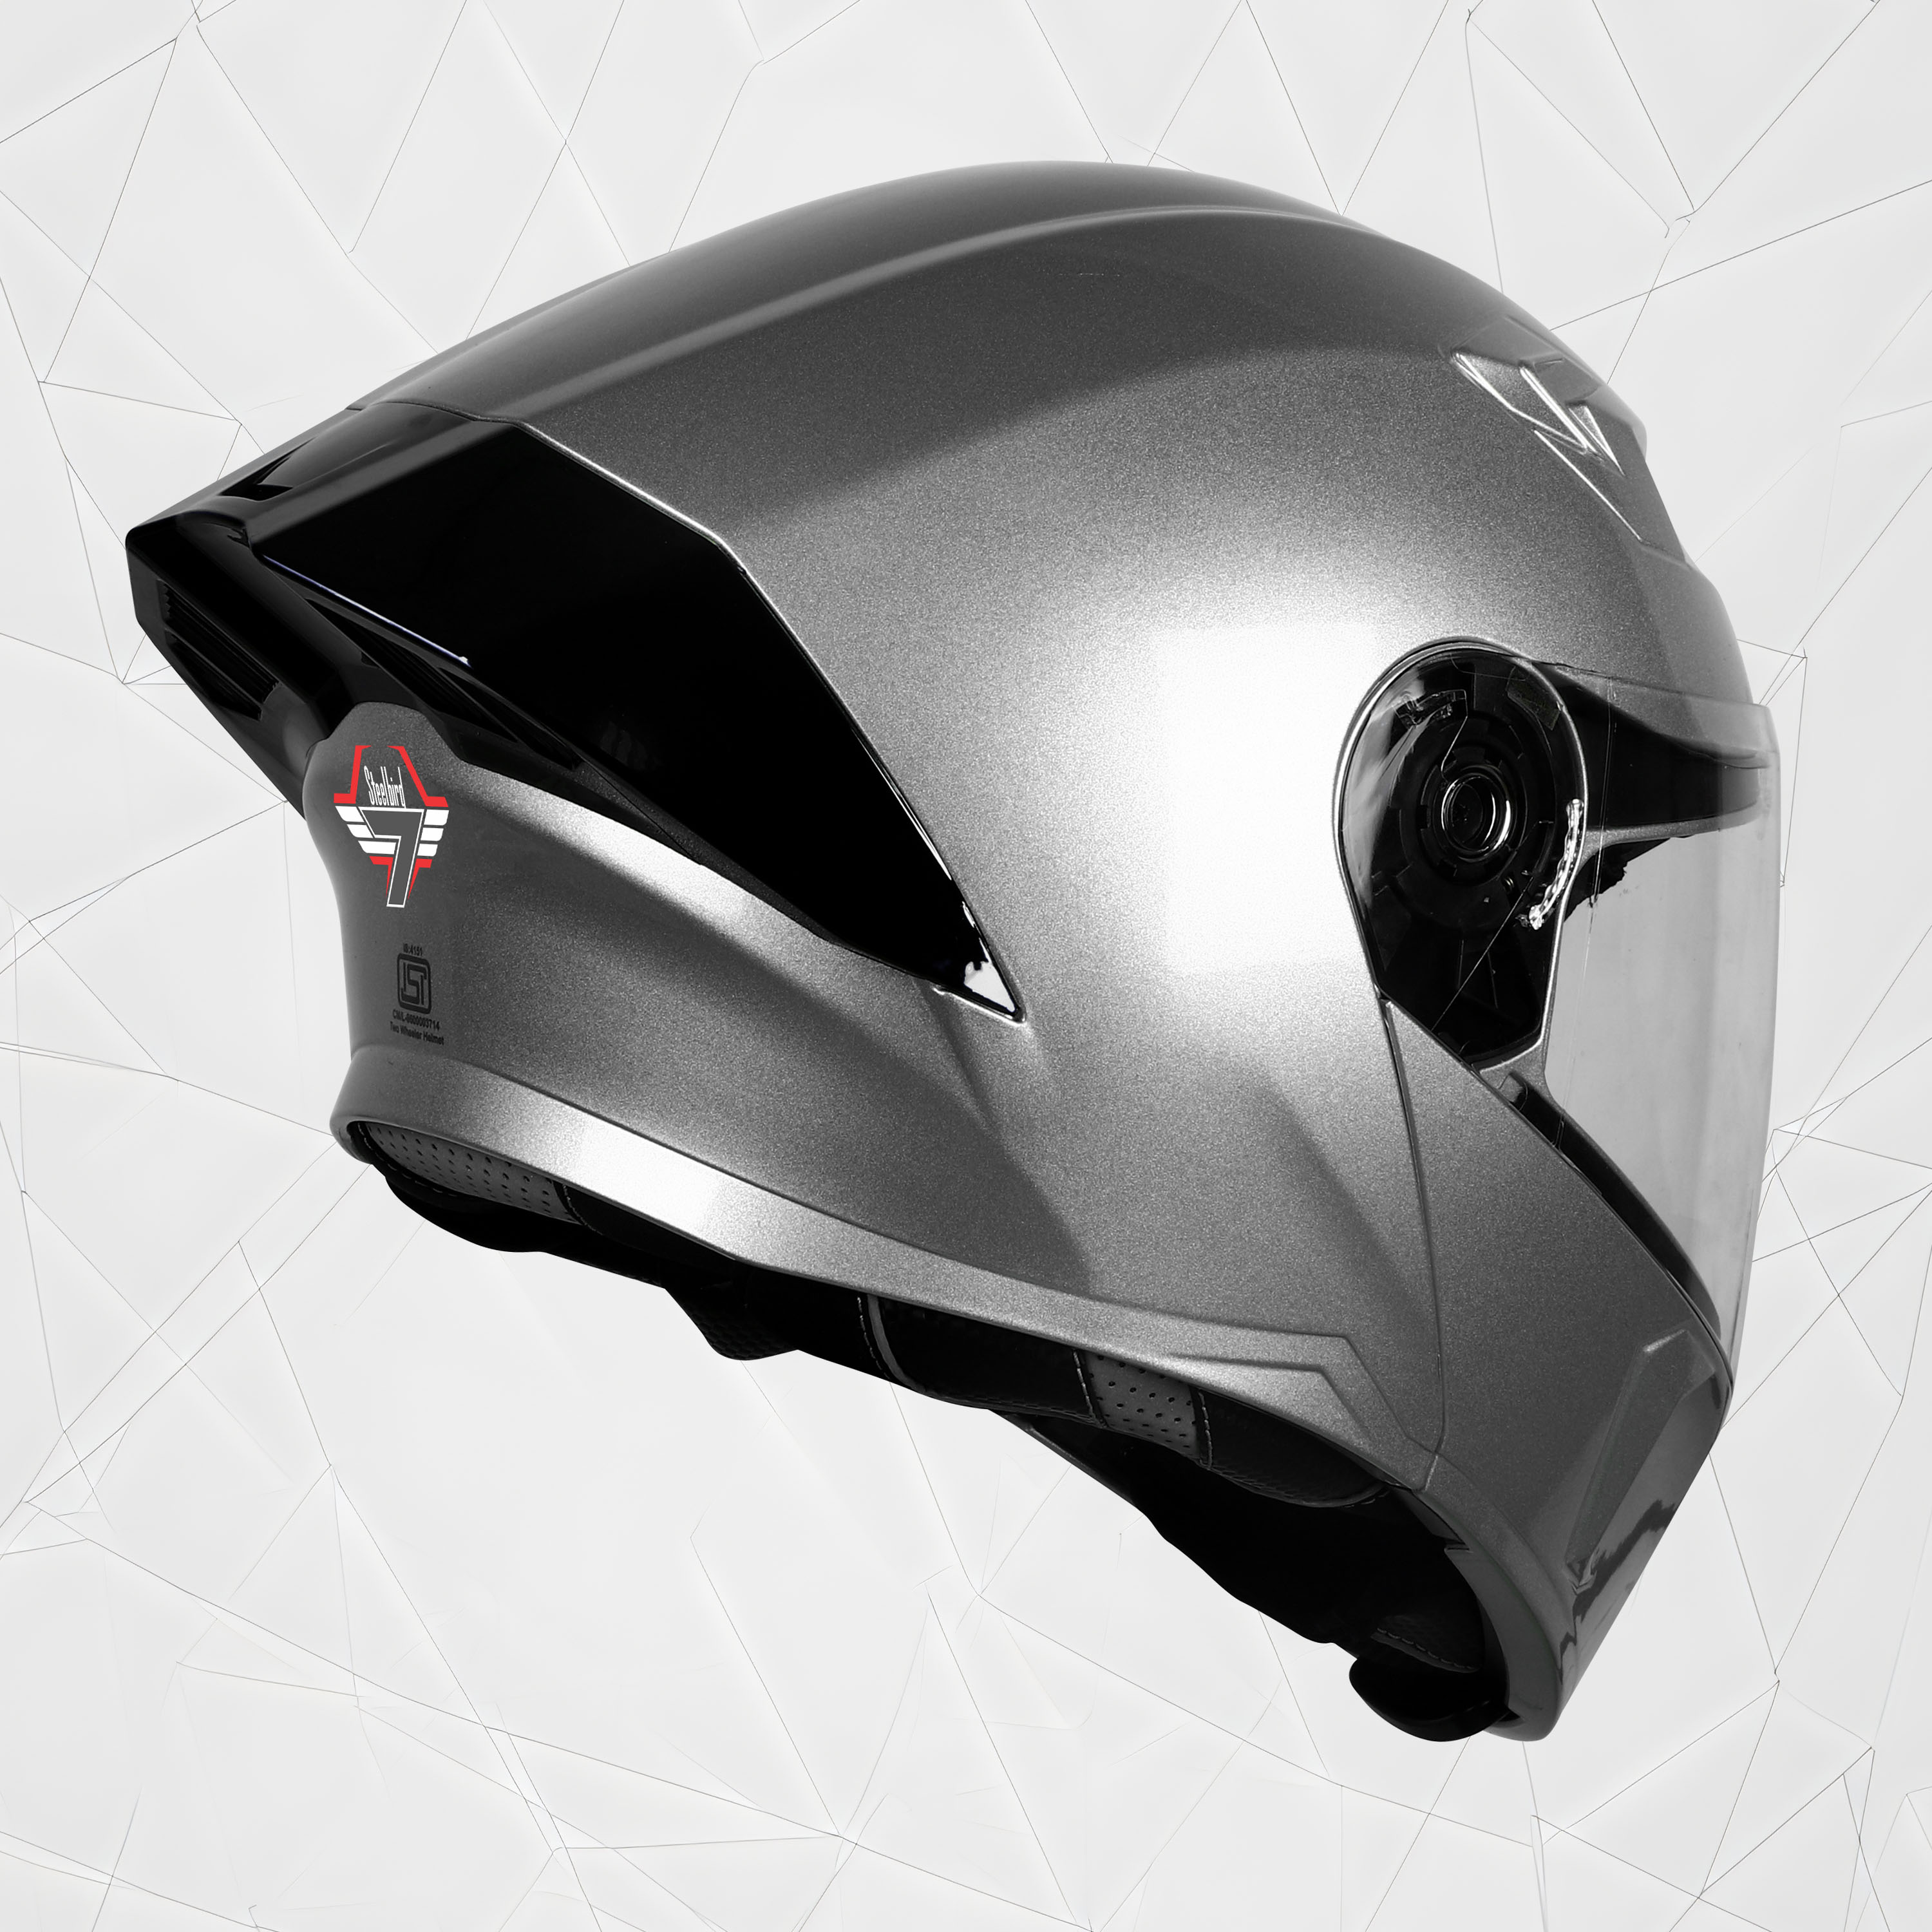 Steelbird SBA-20 7Wings ISI Certified Flip-Up Helmet With Black Spoiler For Men And Women With Inner Smoke Sun Shield (Glossy Silver)